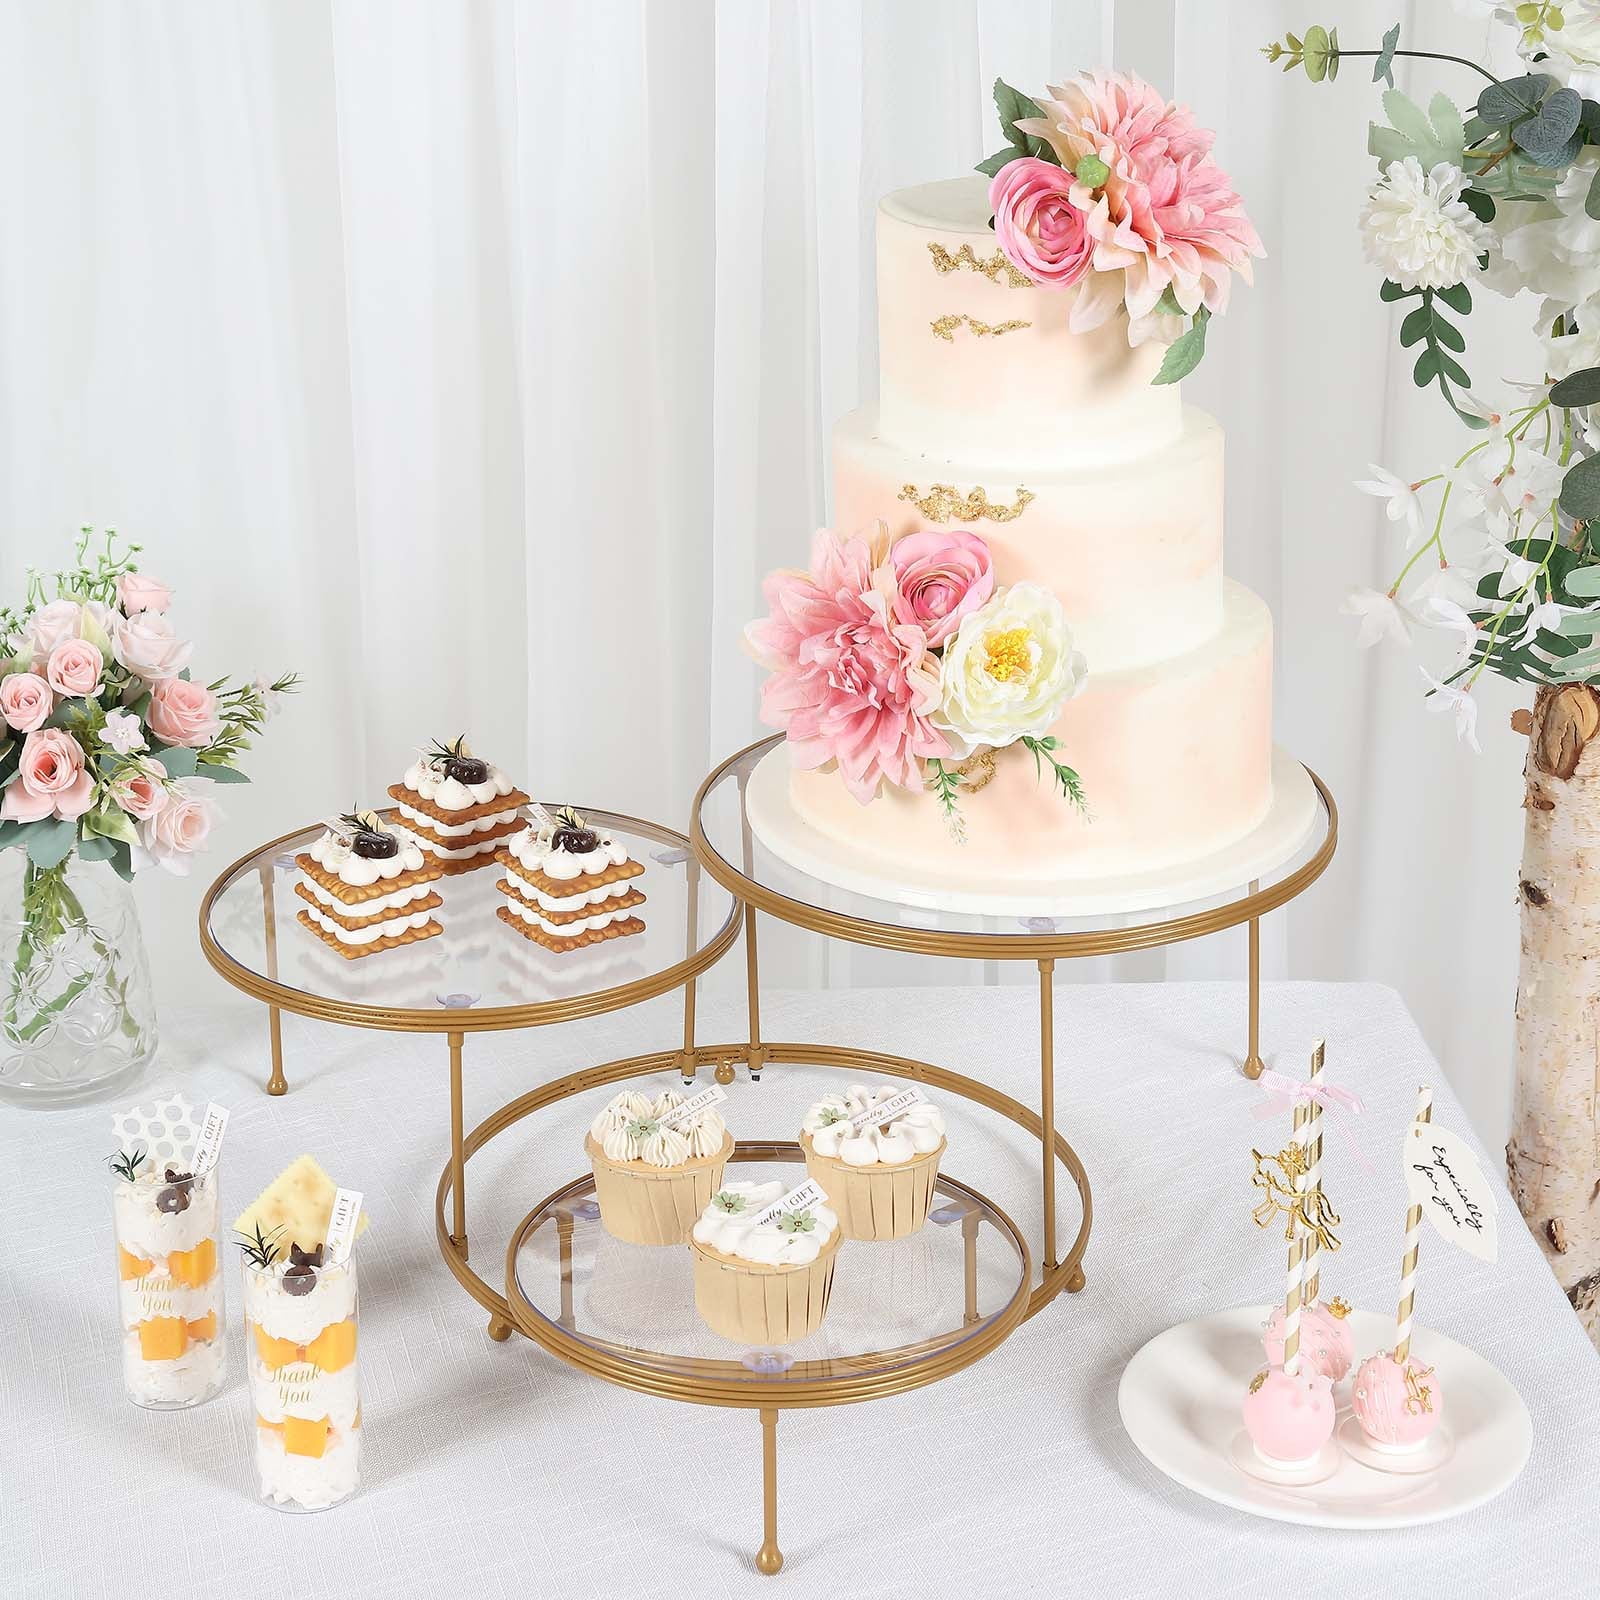 3 Tier Cake Stand – Littlies Party Hire